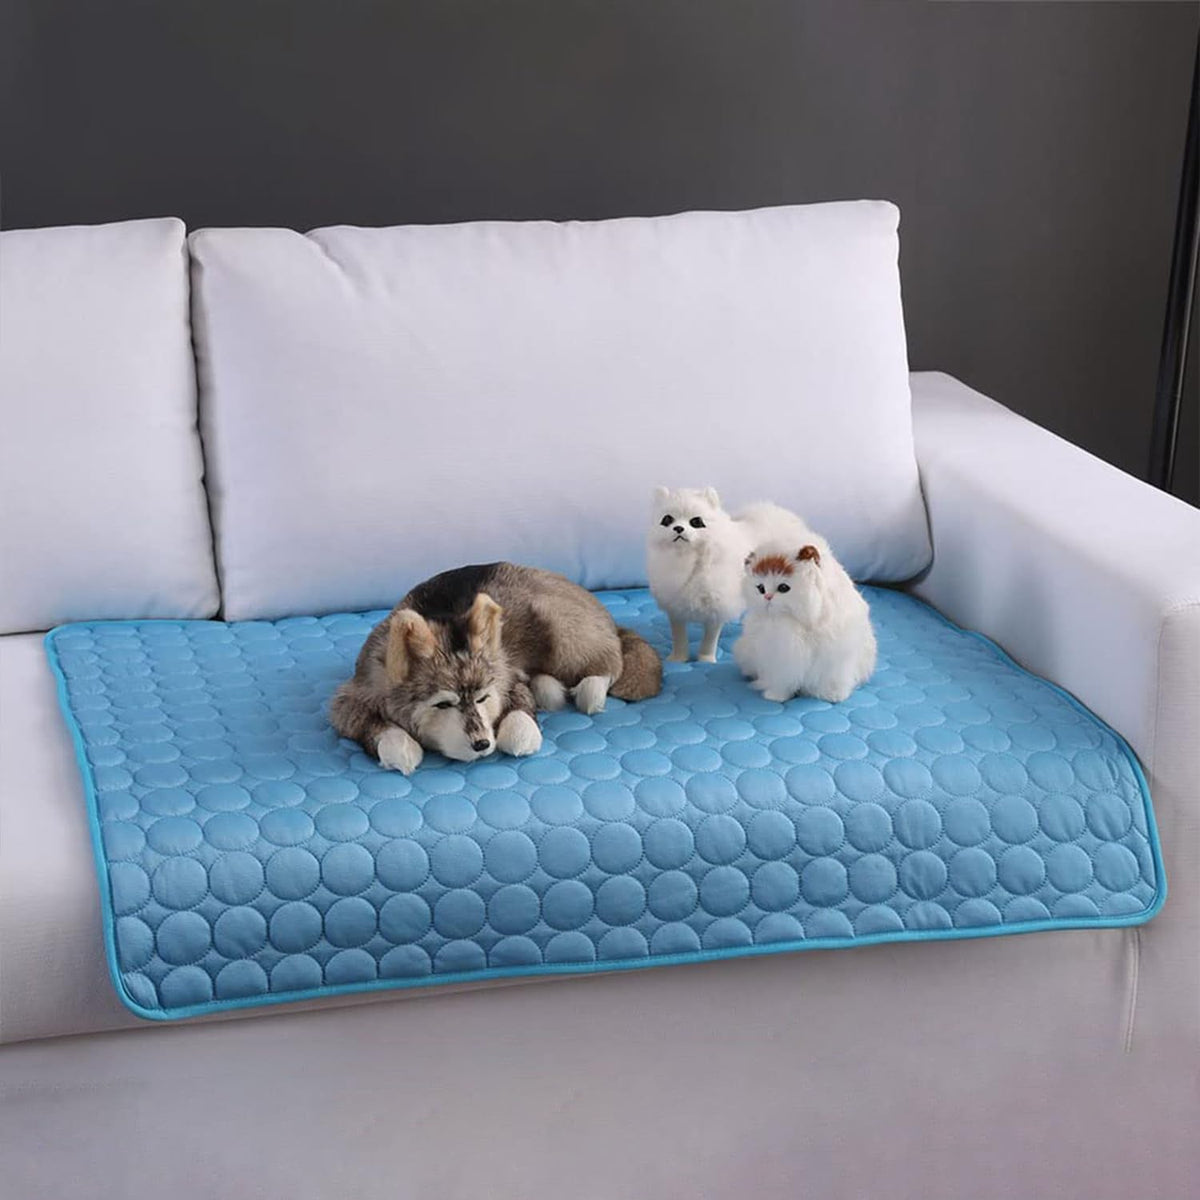 Petvit Rectangular Dog & Cat Bed|Premium Cool Ice Silk with Polyester with Bottom Mesh|Multi-Utility Self-Cooling Pad for Dog & Cat|Light-Weight & Durable Dog Bed|ZQCJ001B-XL|Blue